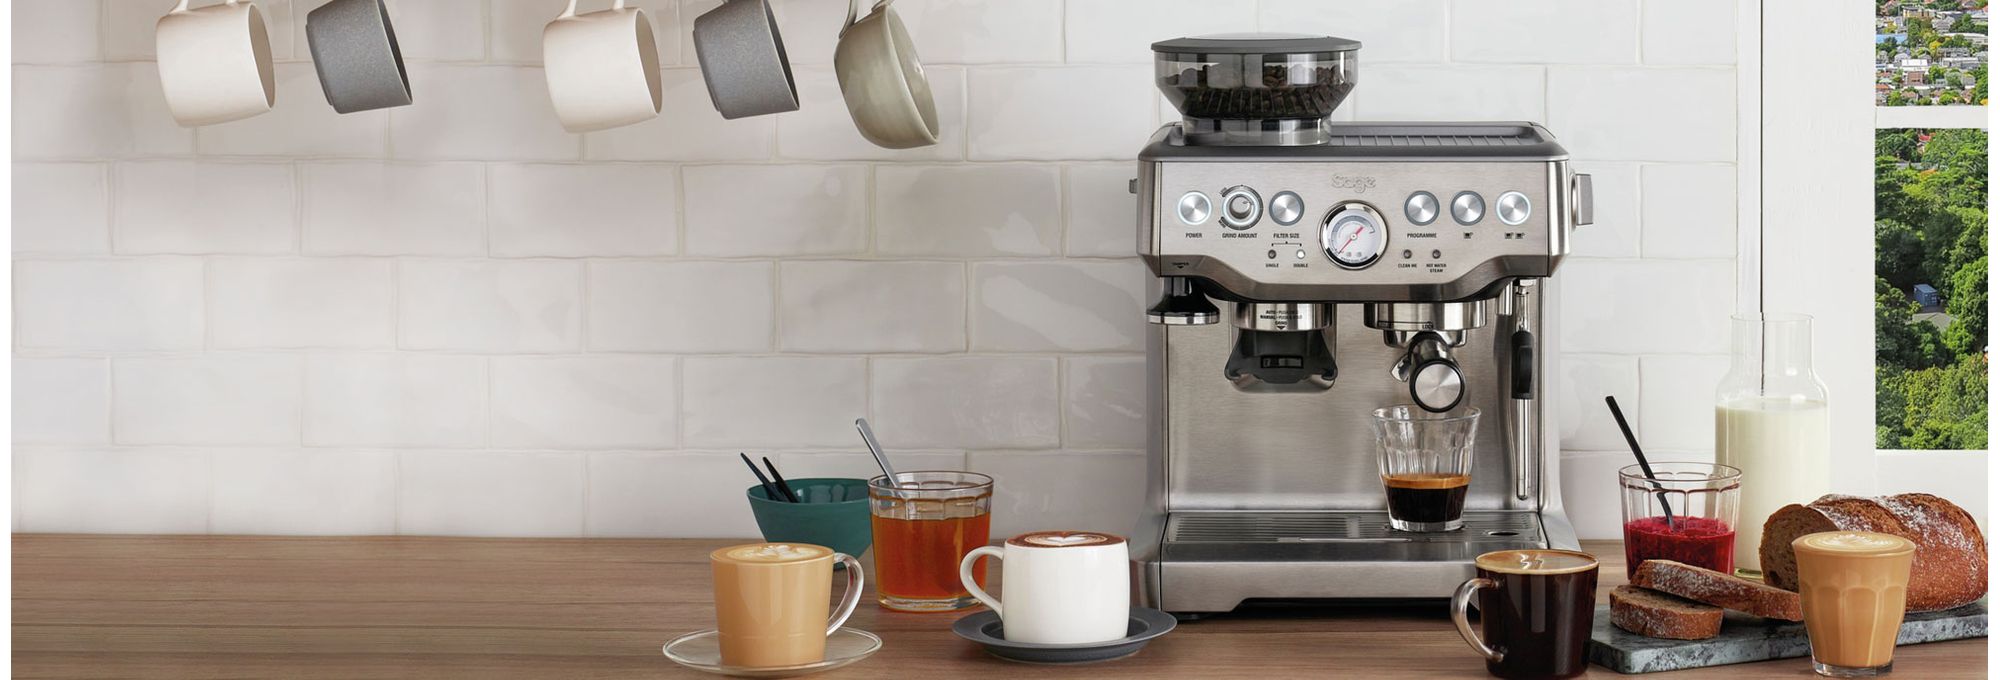 Sage Barista Express BES875UK review - Which?